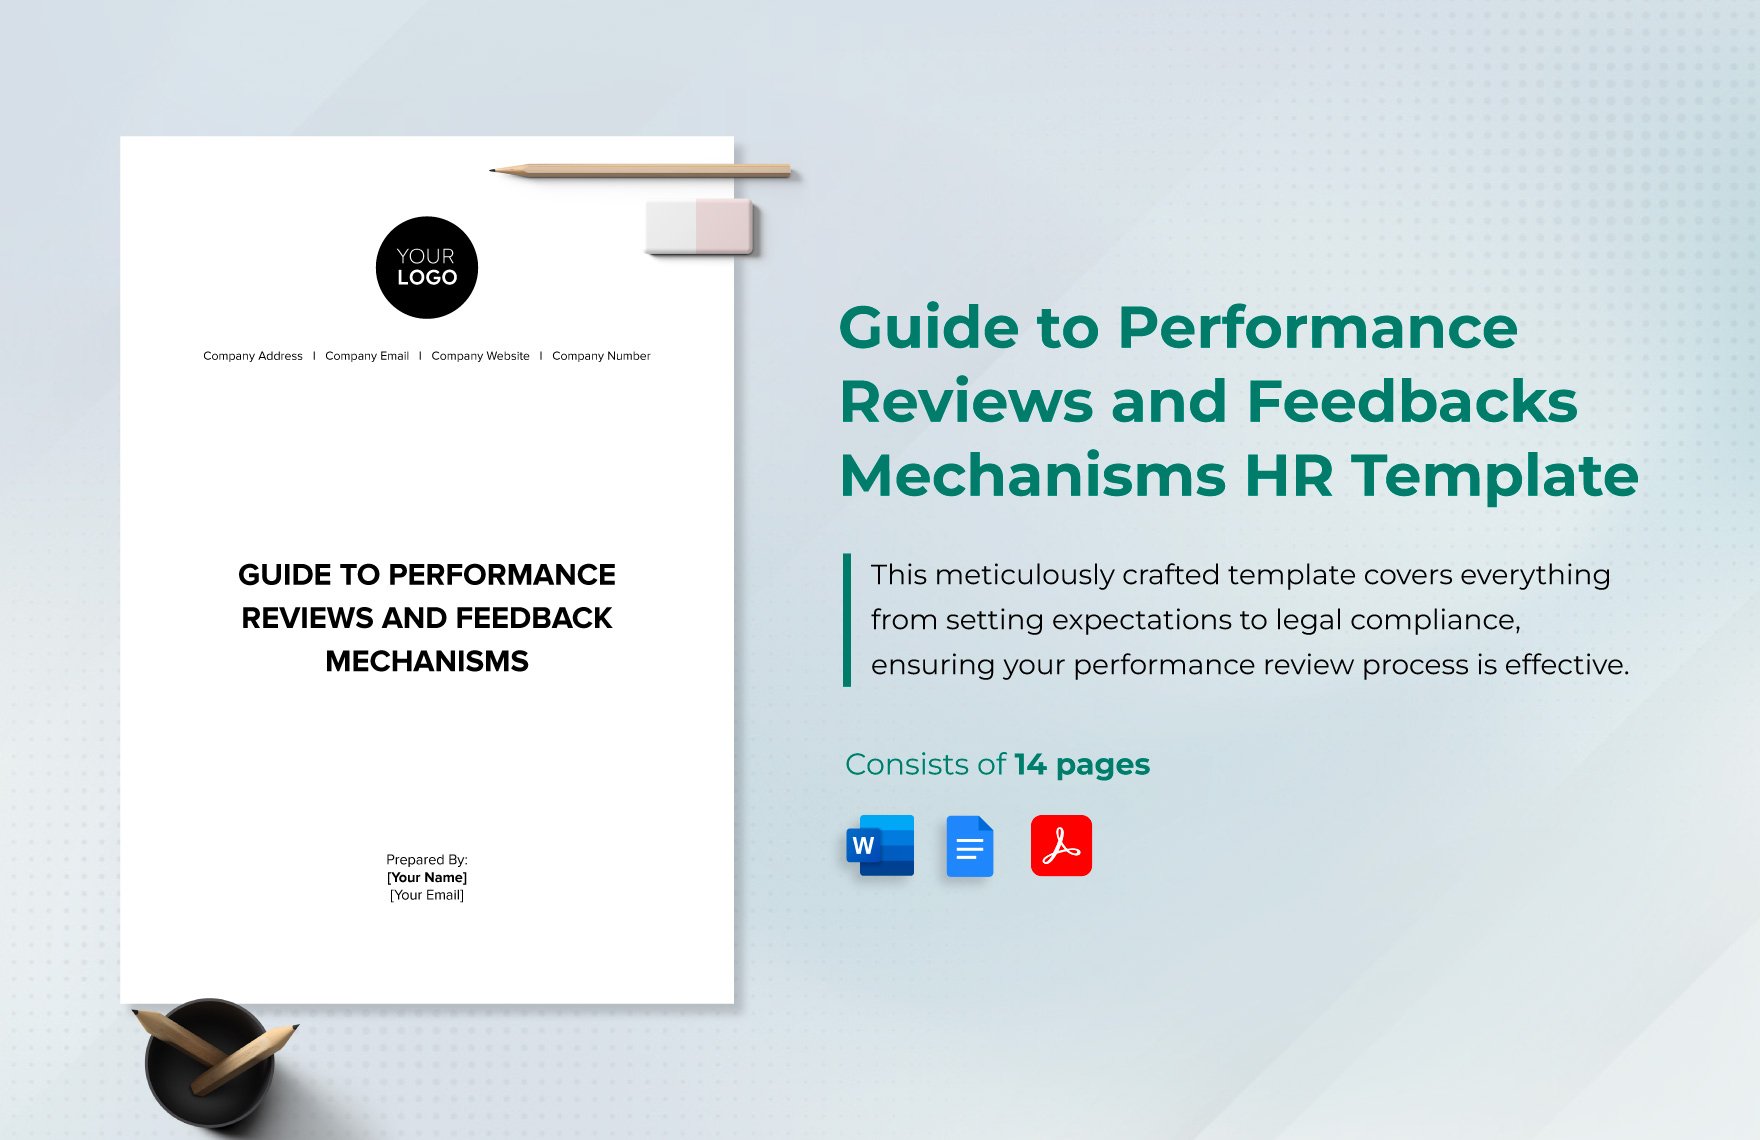 Guide to Performance Reviews and Feedback Mechanisms HR Template